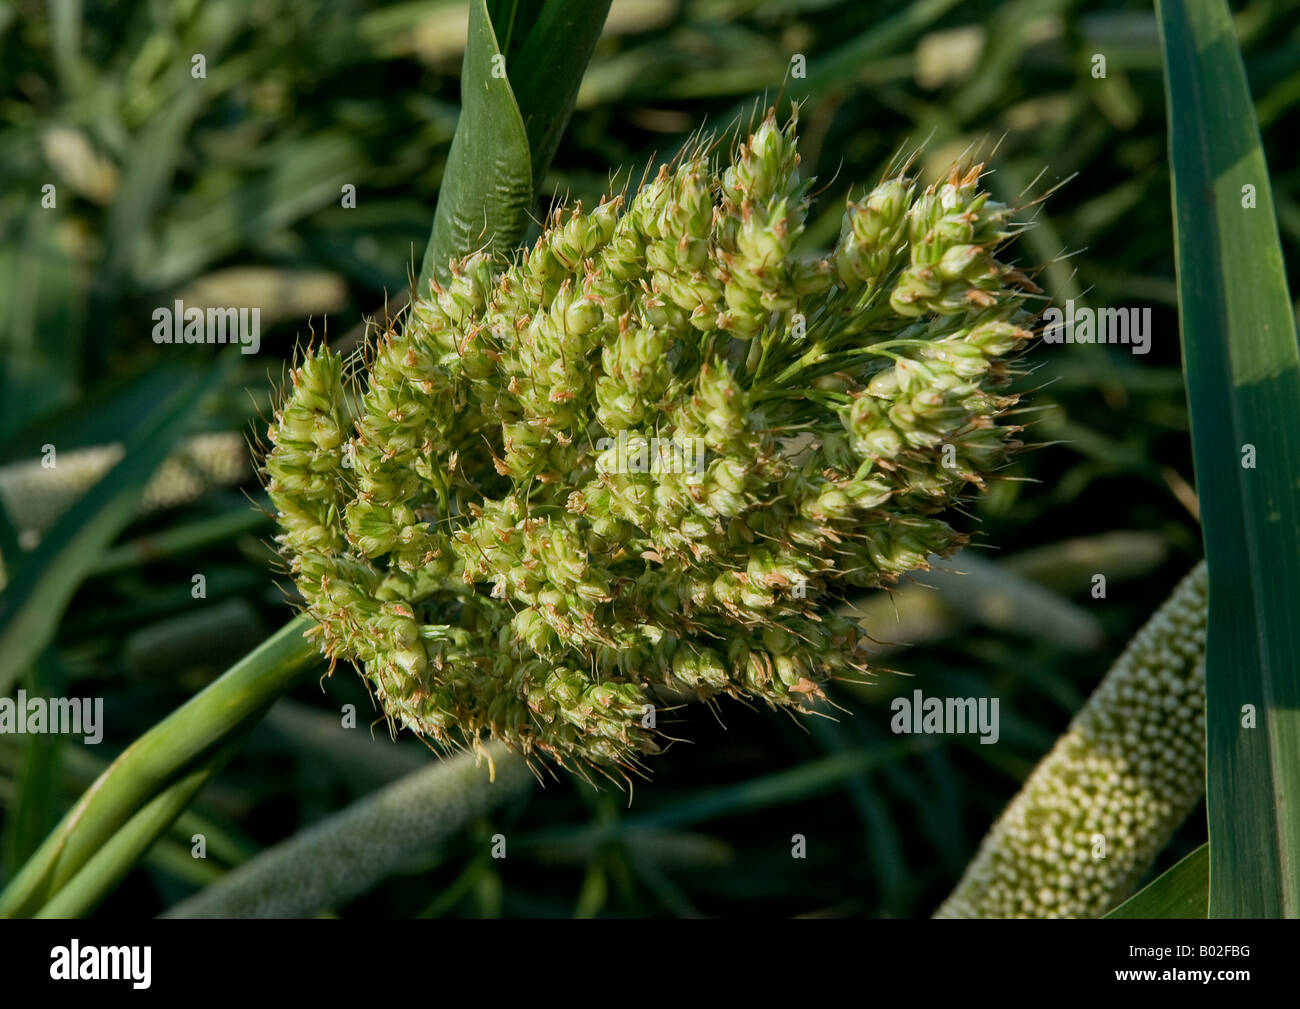 Close-up view of a thick stalk of millet plant carrying a large spiked cob head of clustered florets of grains for harvesting. Stock Photo